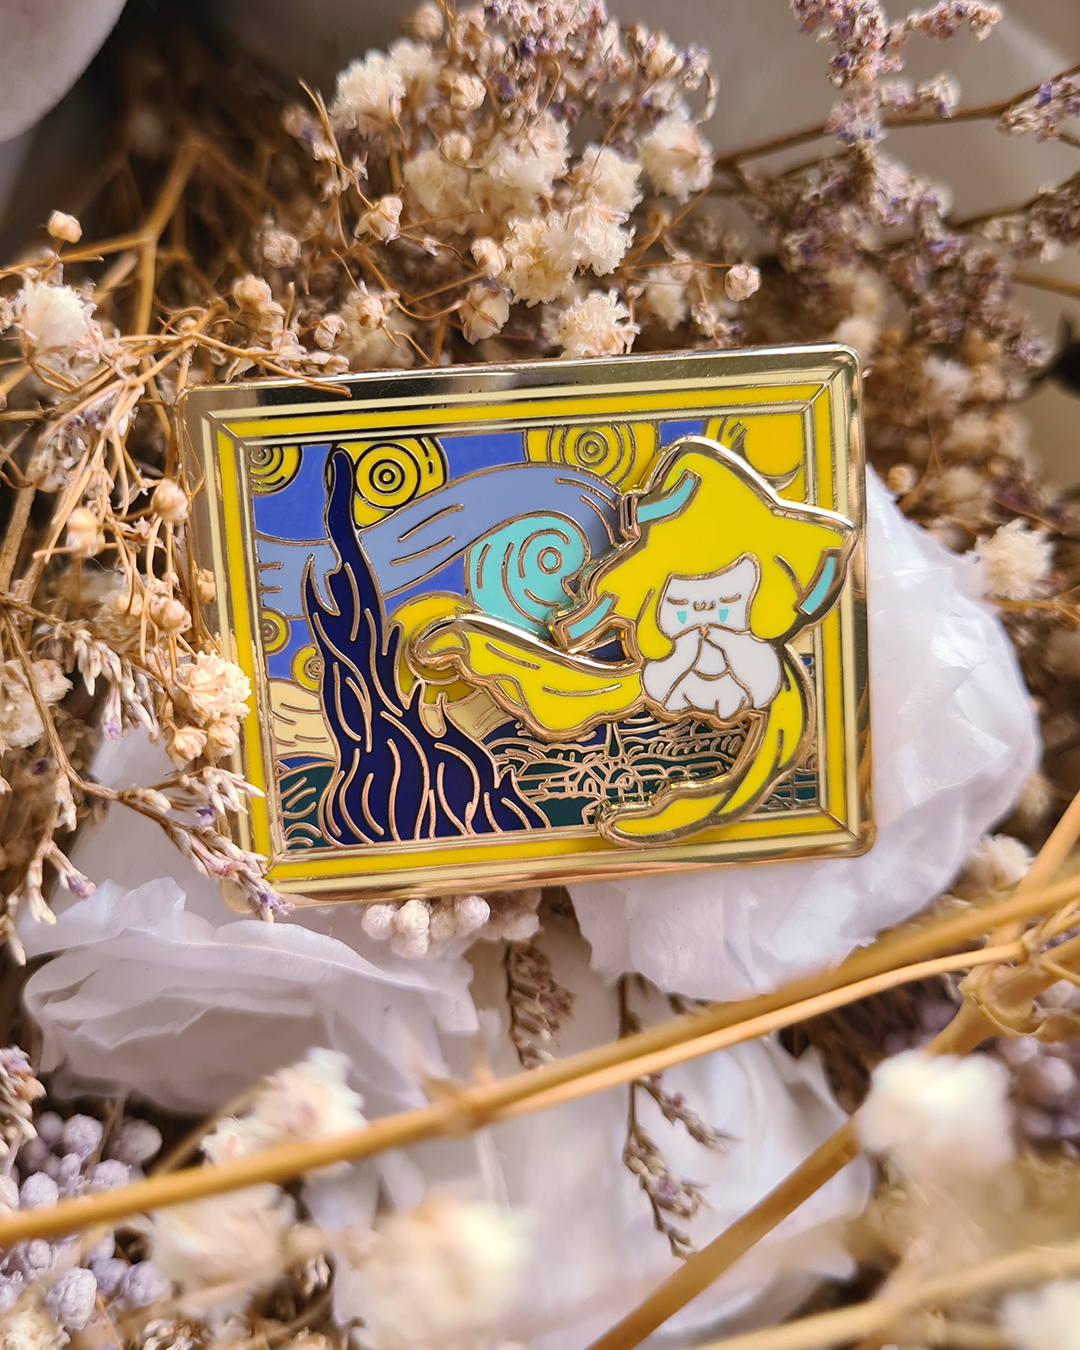 Famous Painting - Starry Starry Night (Jirachi) 3D Enamel Pin